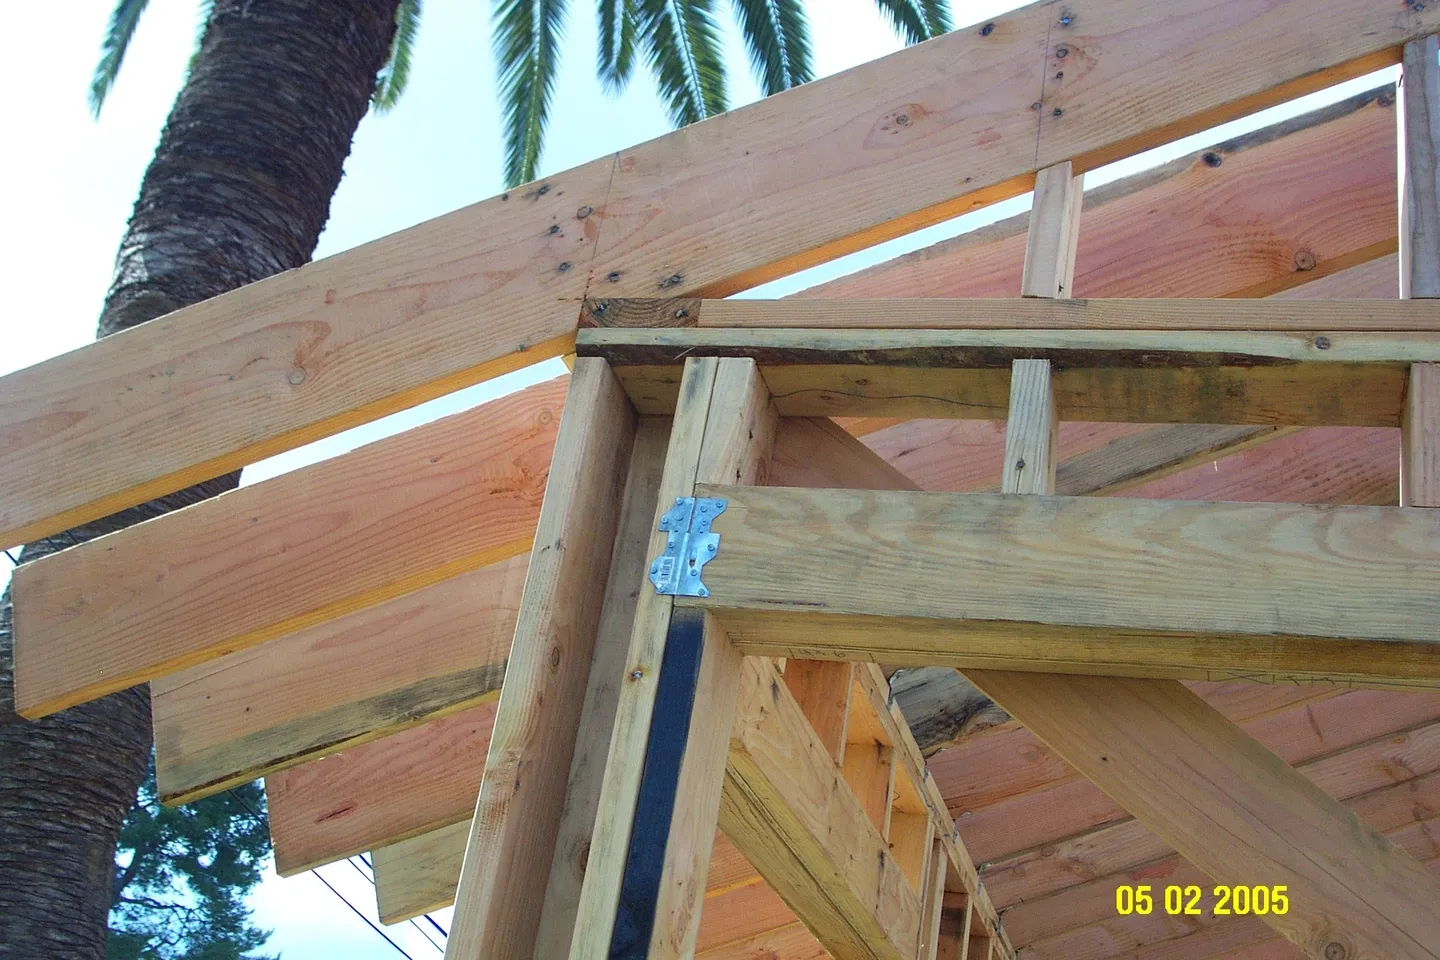 A wooden structure with some wood beams and a palm tree